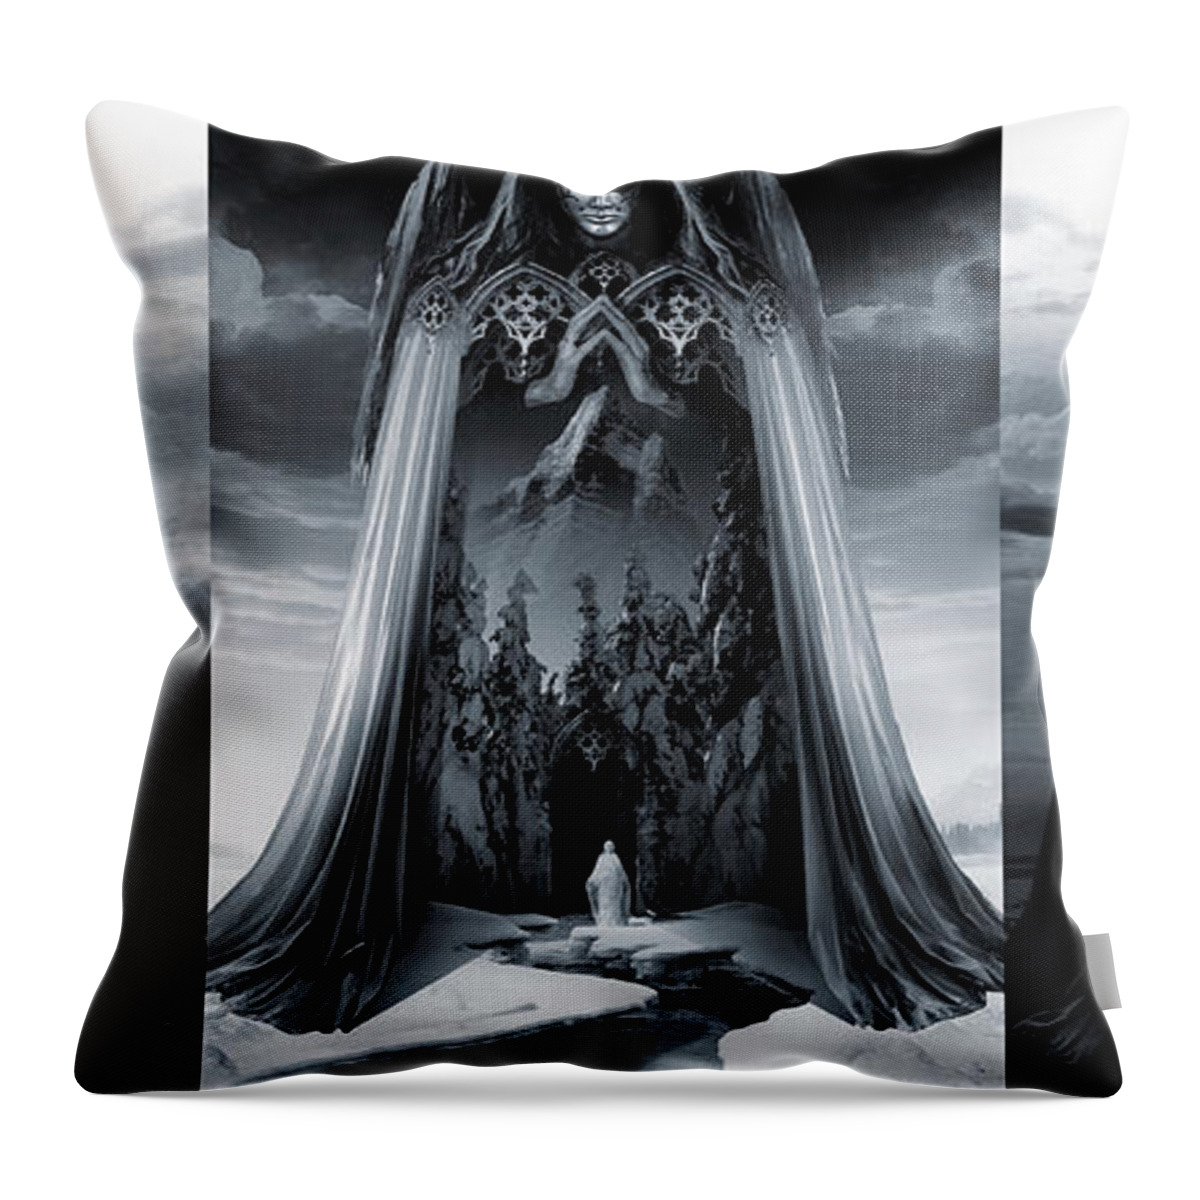  Fallen Angel Demon Religion Faith Skull Death Angels Deities Throw Pillow featuring the digital art Angels of Infinity Light Mercy by George Grie